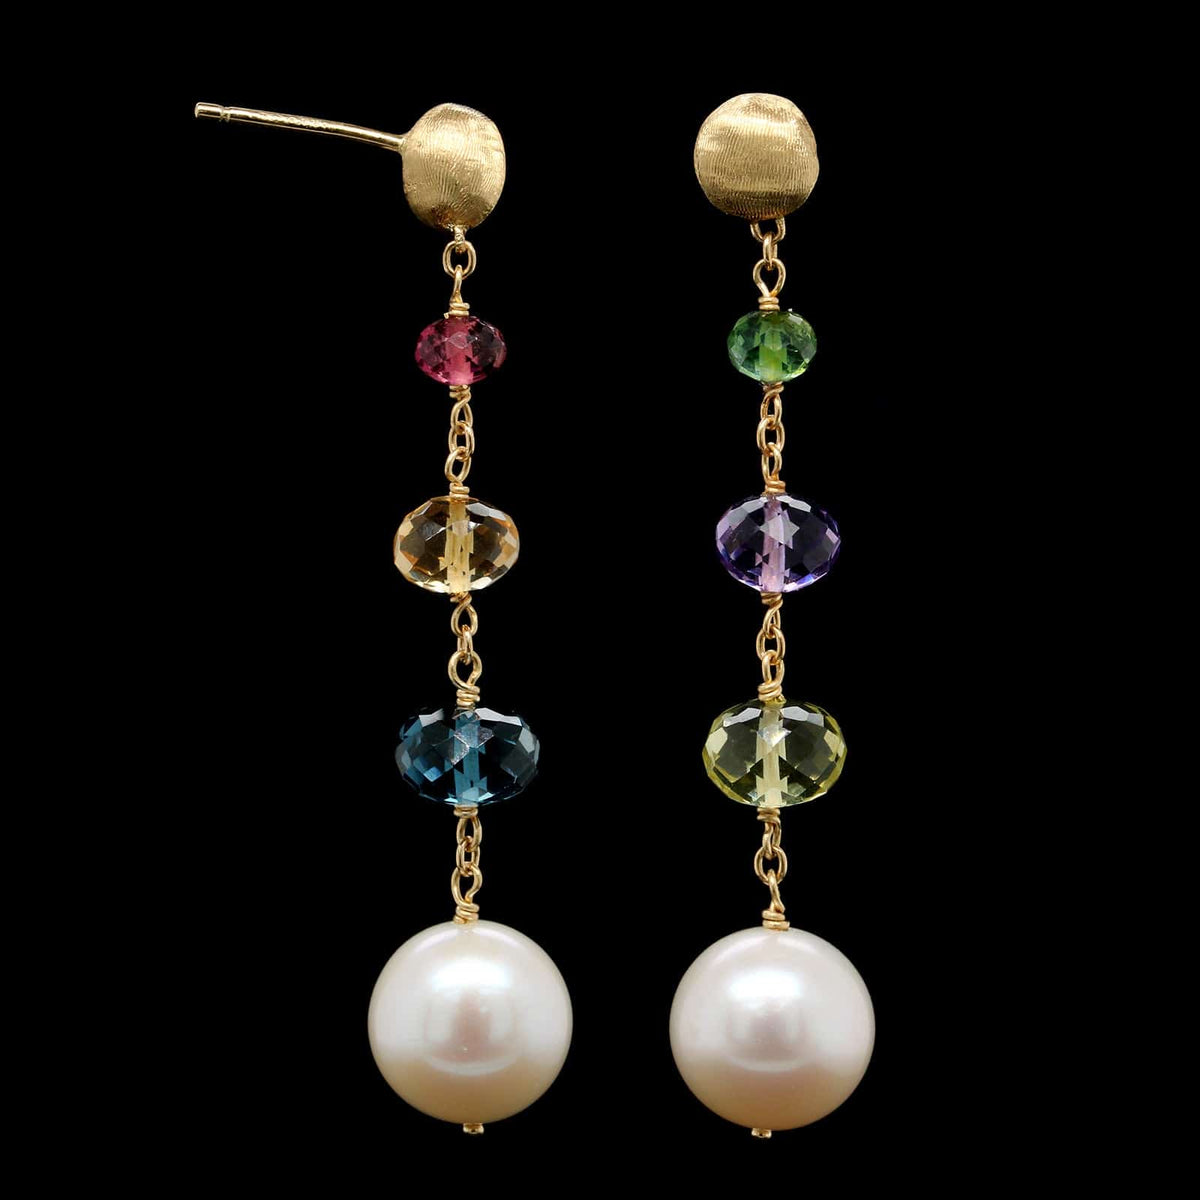 Marco Bicego 18K Yellow Gold Estate Multi Gem and Cultured Pearl 'Africa' Drop Earrings